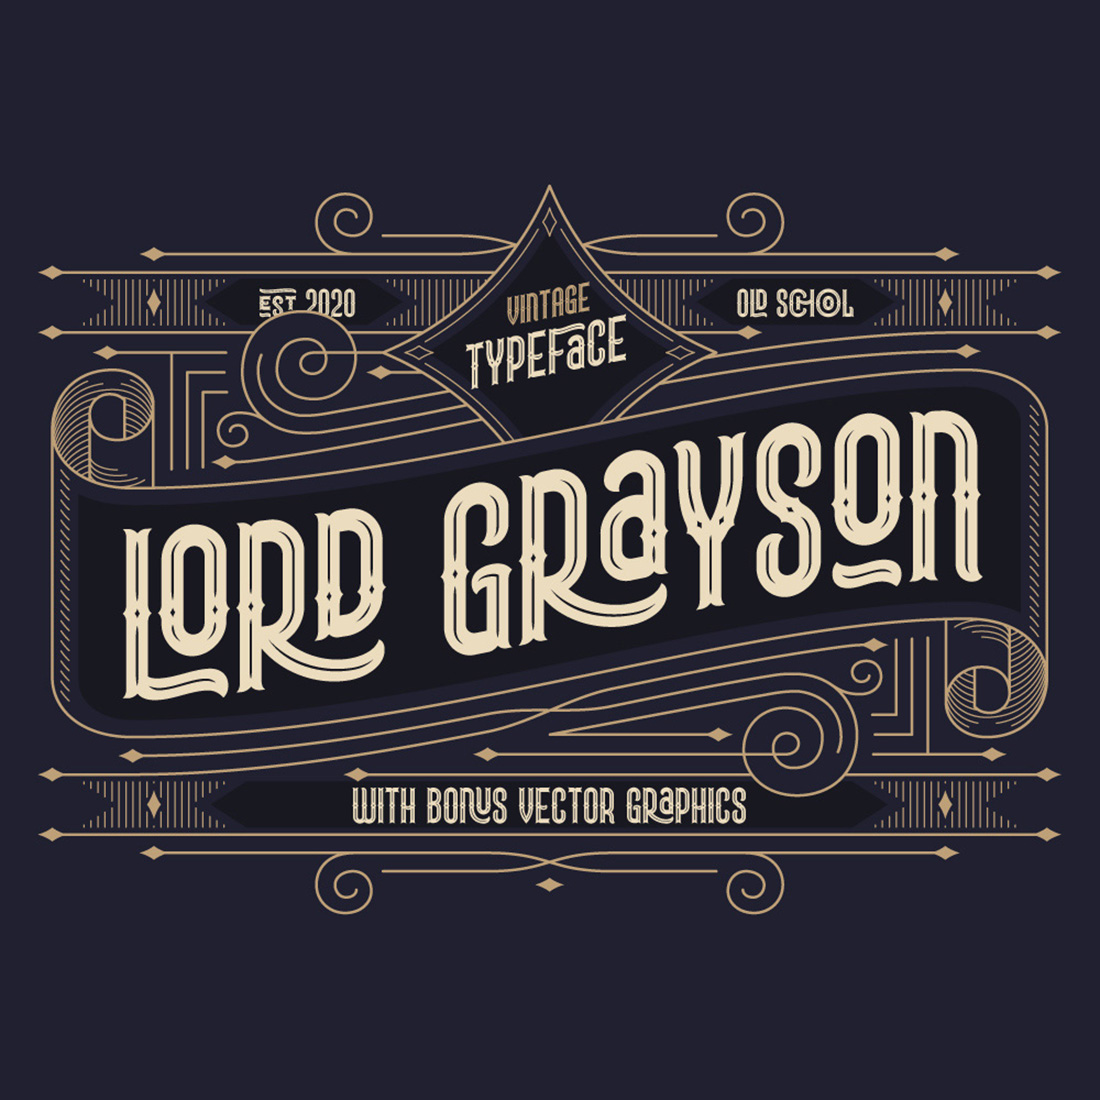 Lord Grayson Vintage Font cover image.